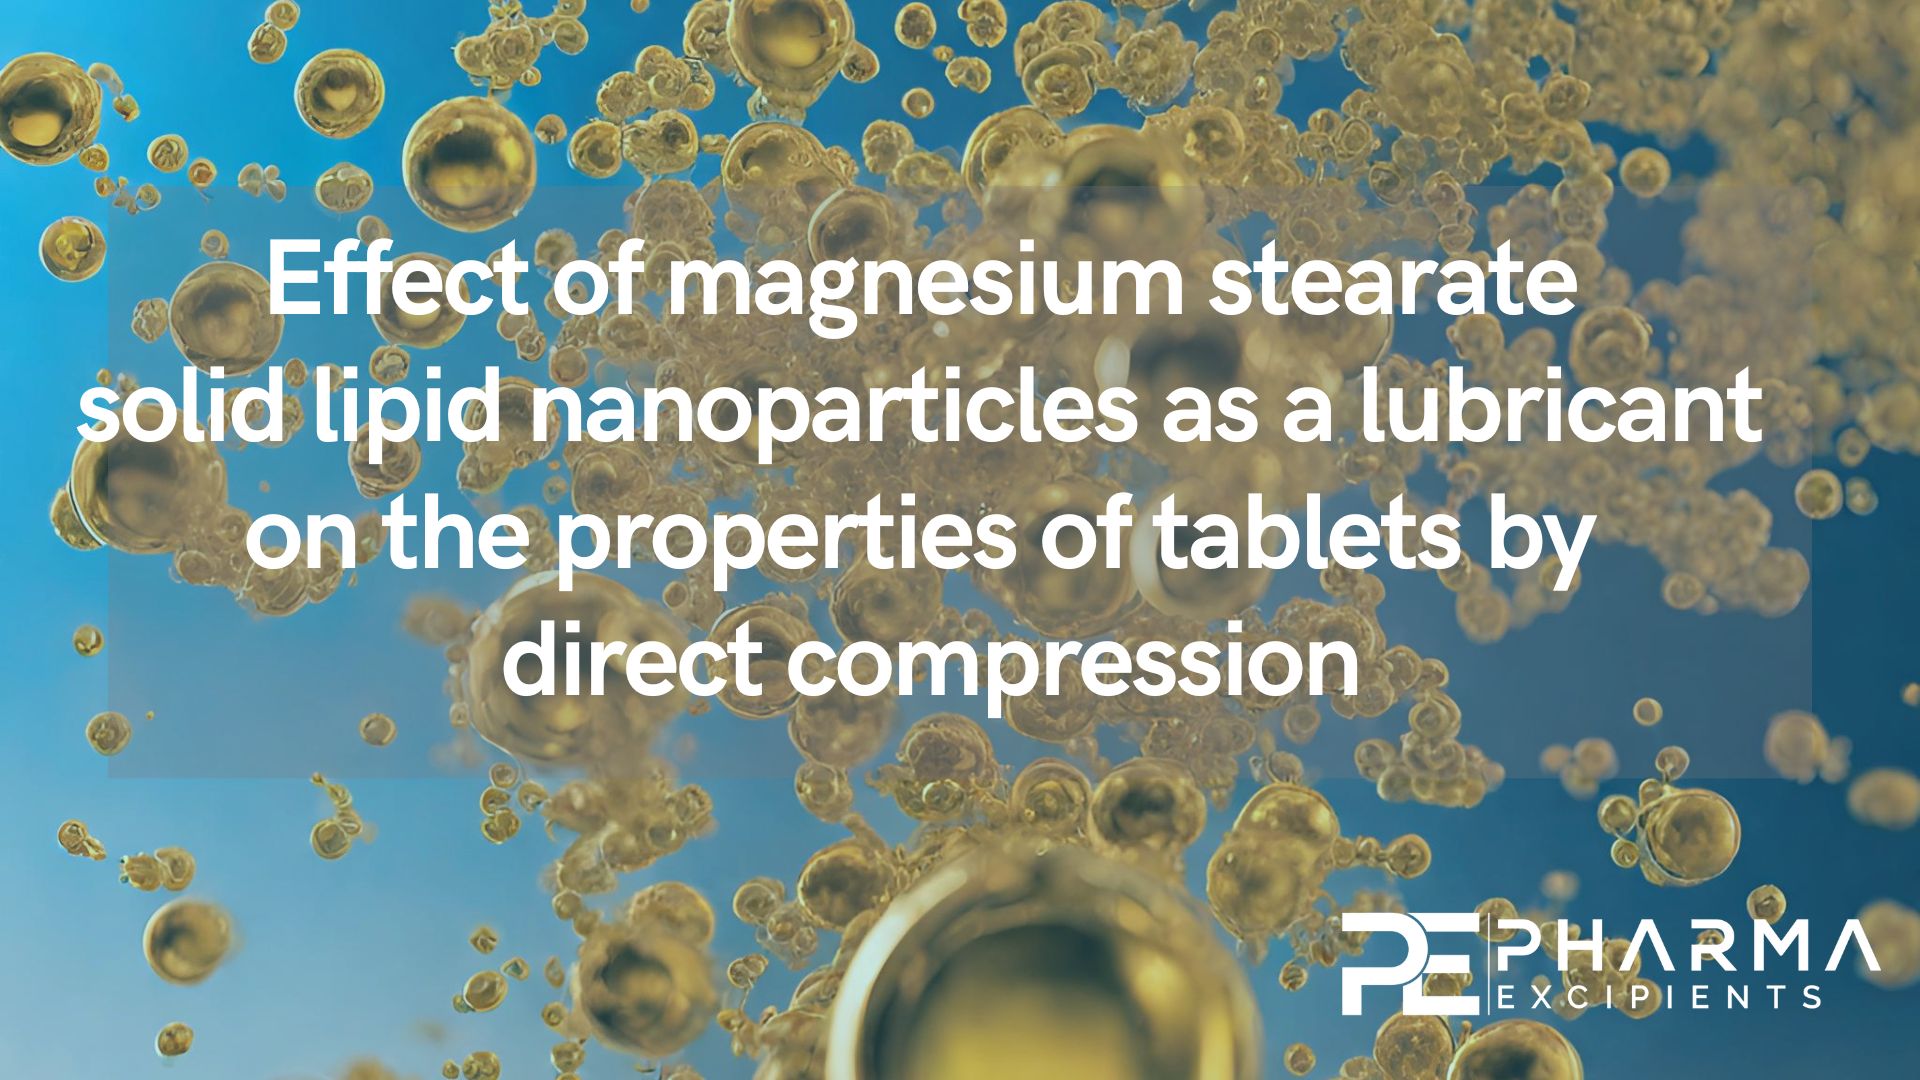 Effect of magnesium stearate solid lipid nanoparticles as a lubricant on the properties of tablets by direct compression